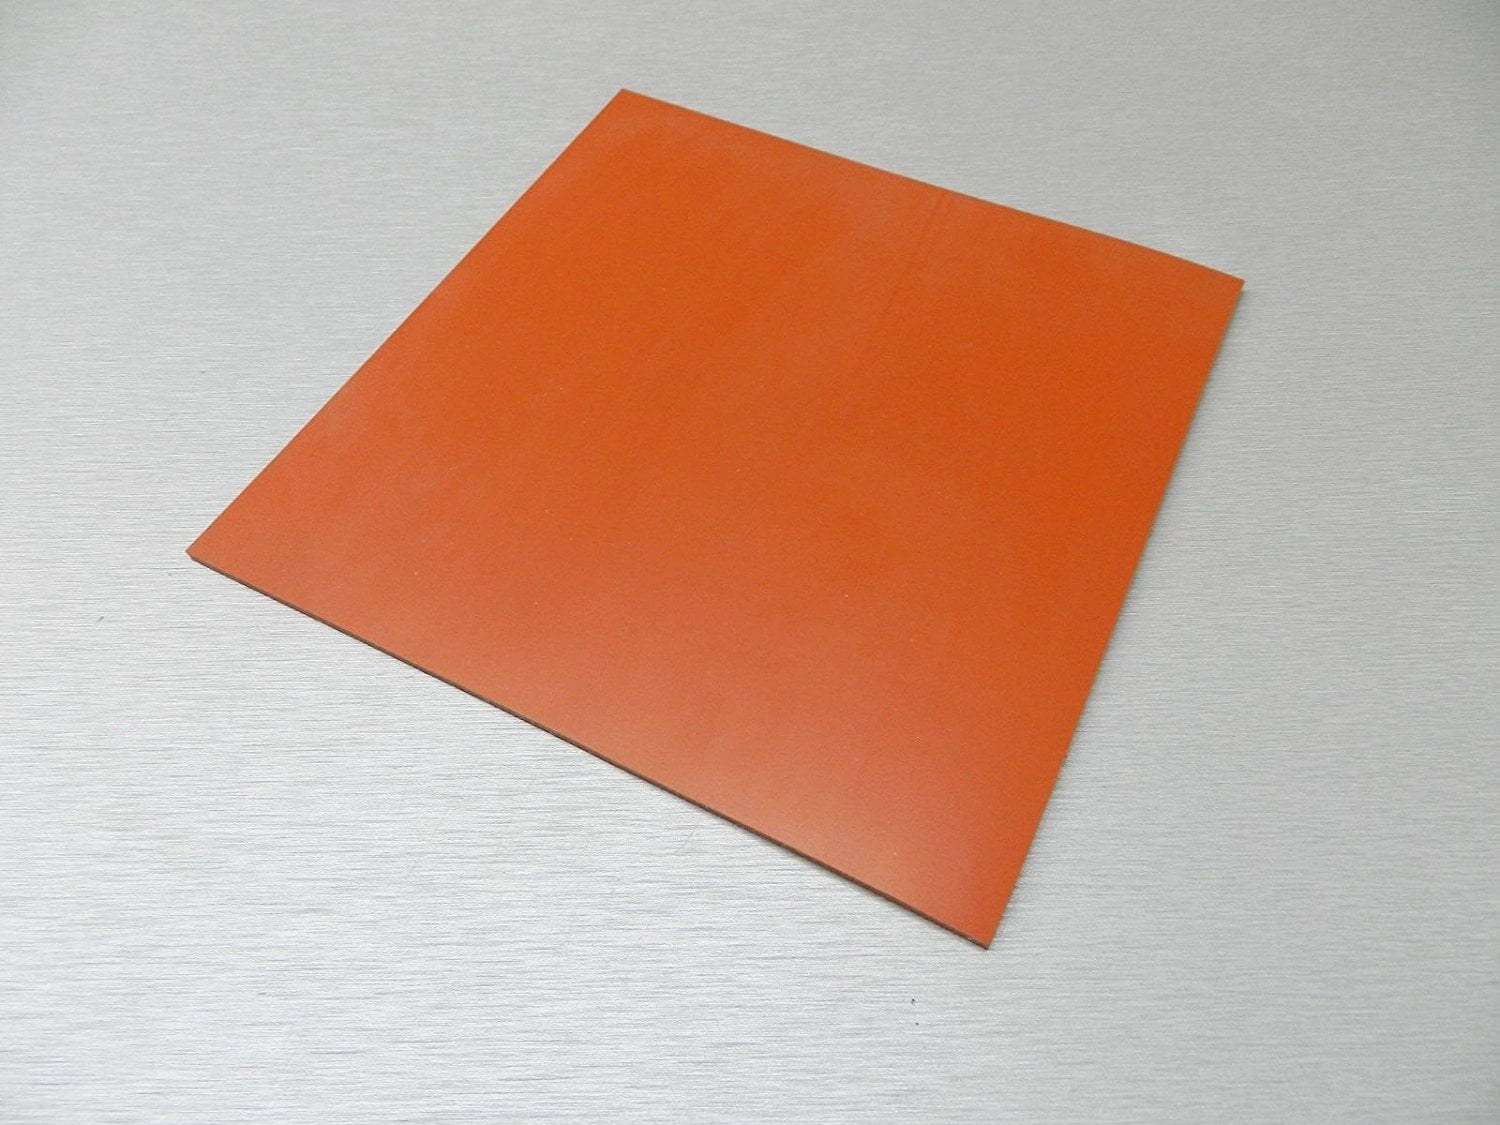 60 durometer High Temp FDA 12" x 12" Red Silicone Rubber Sheet 1/8" thick 